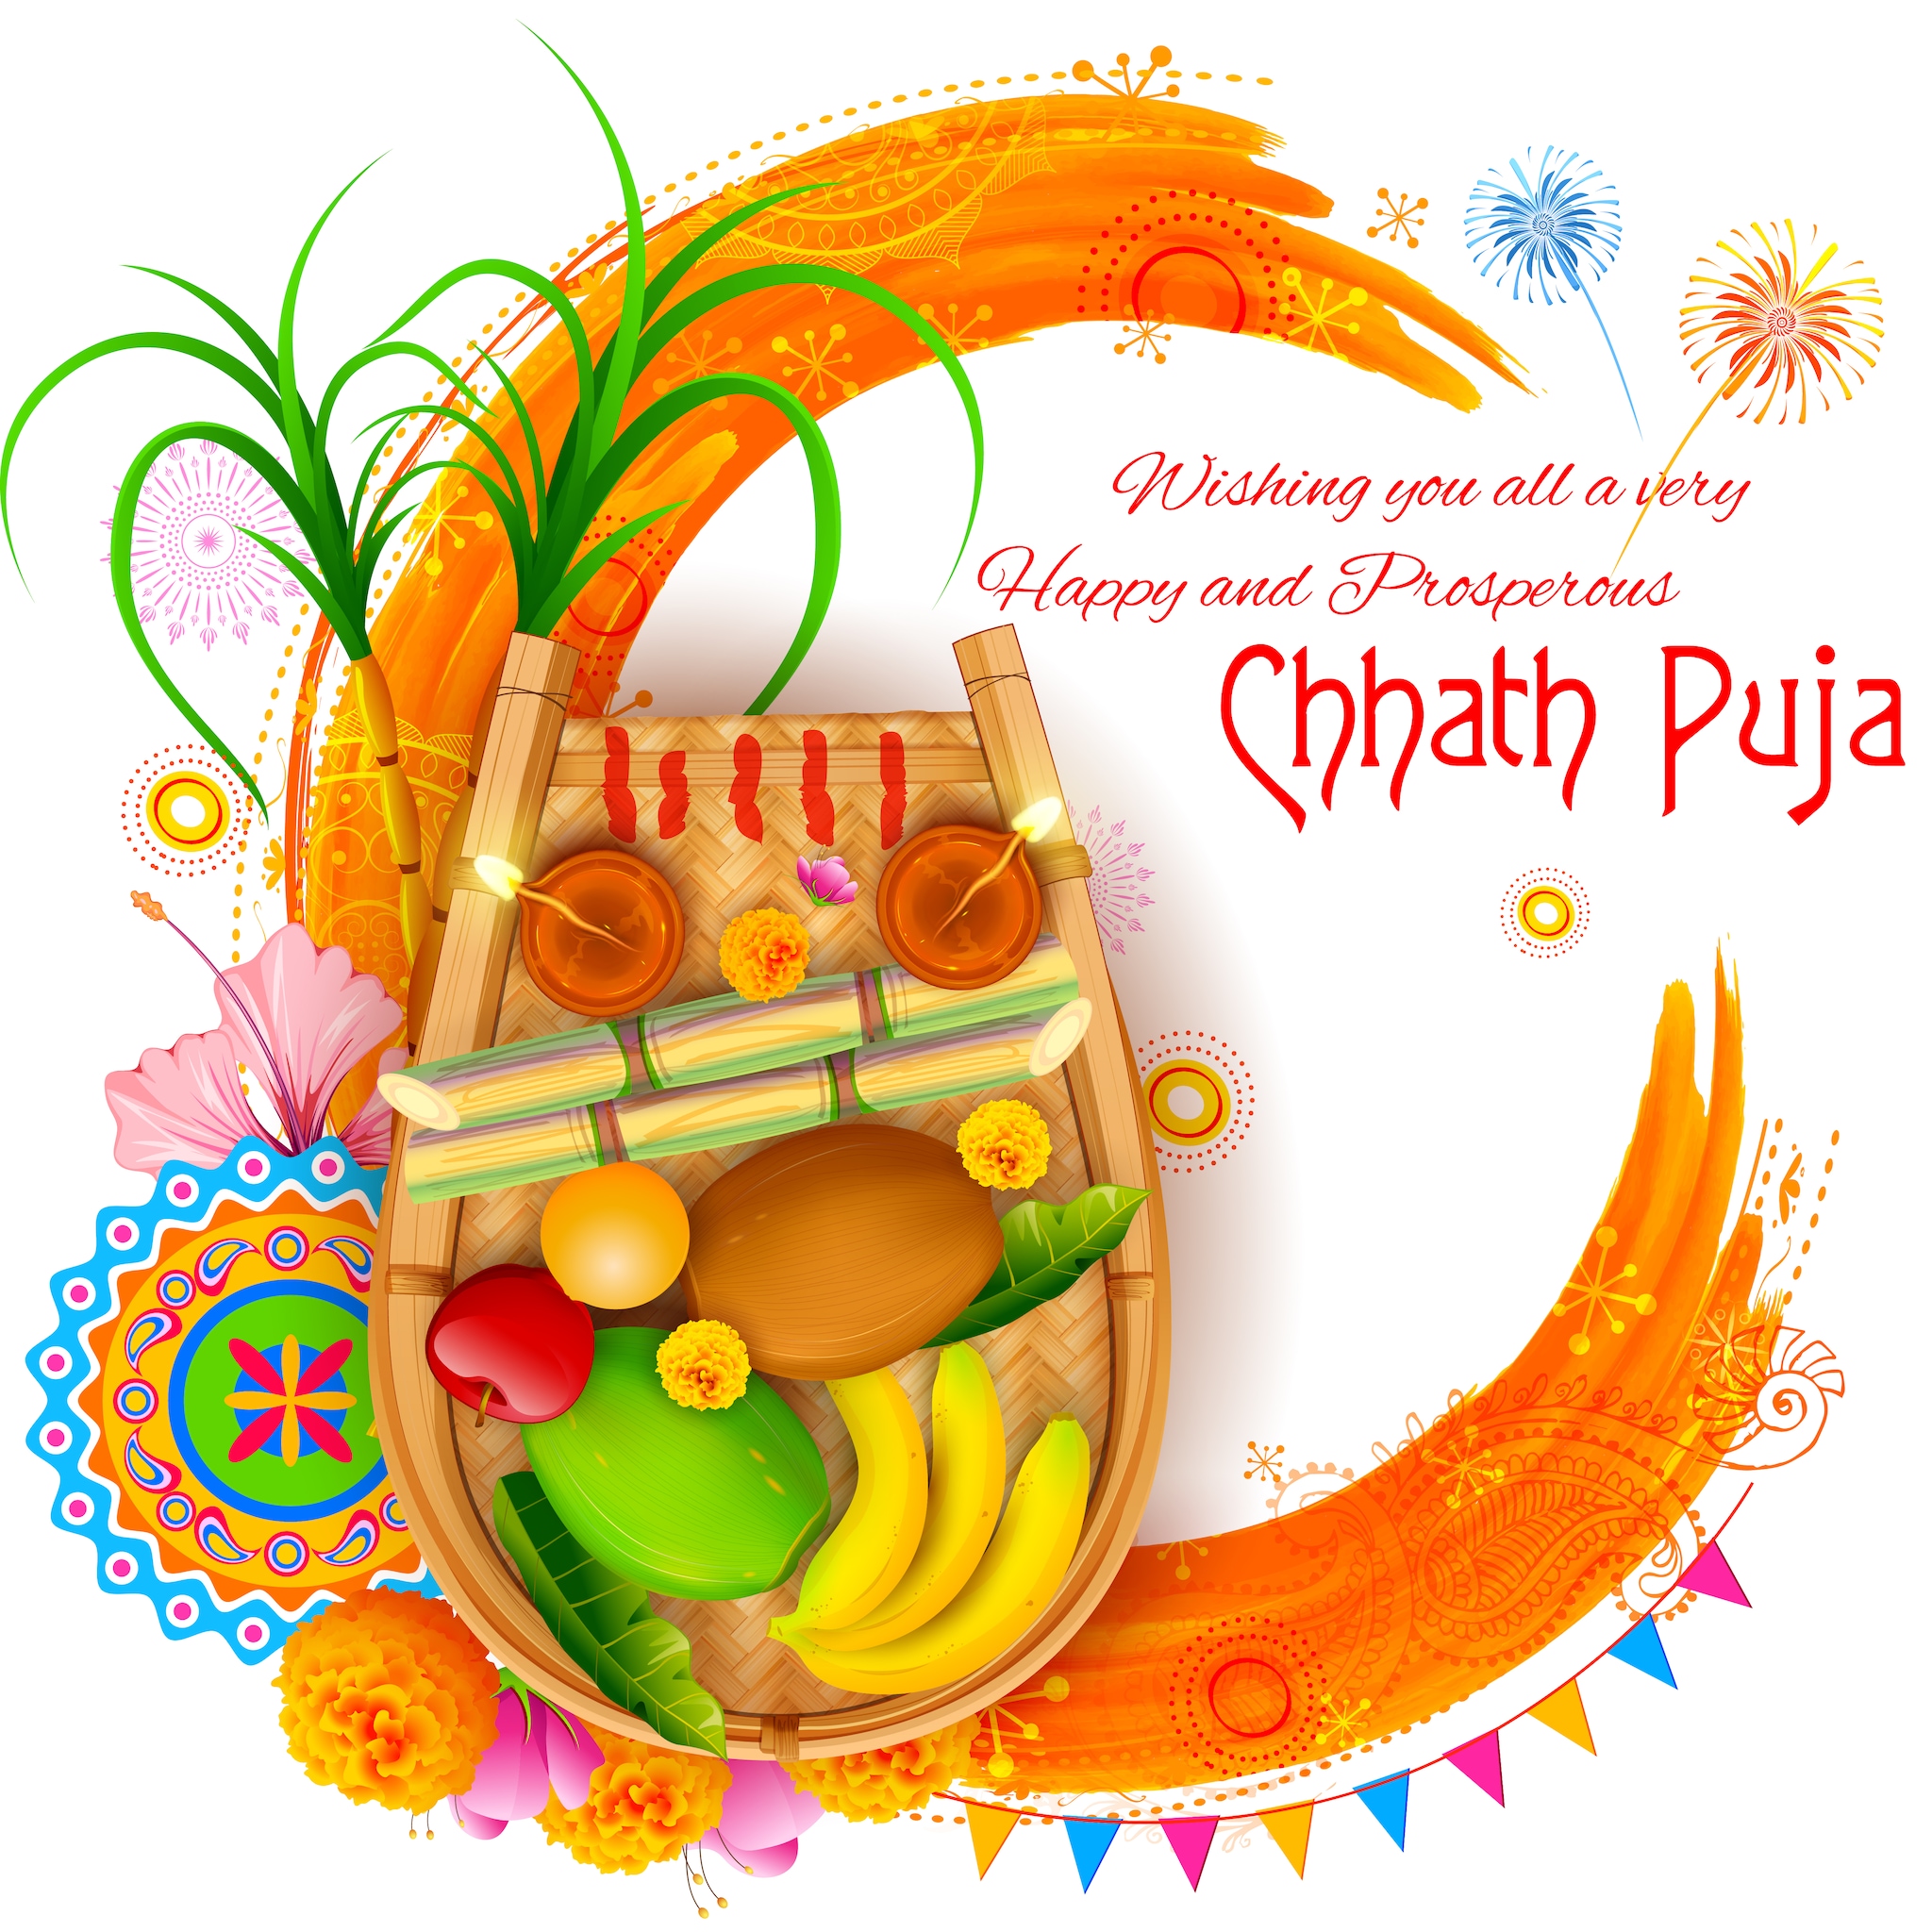 Happy Chhath Puja 2022: Images, Wishes, Quotes, Messages and WhatsApp Greetings to Share. (Image: Shutterstock)